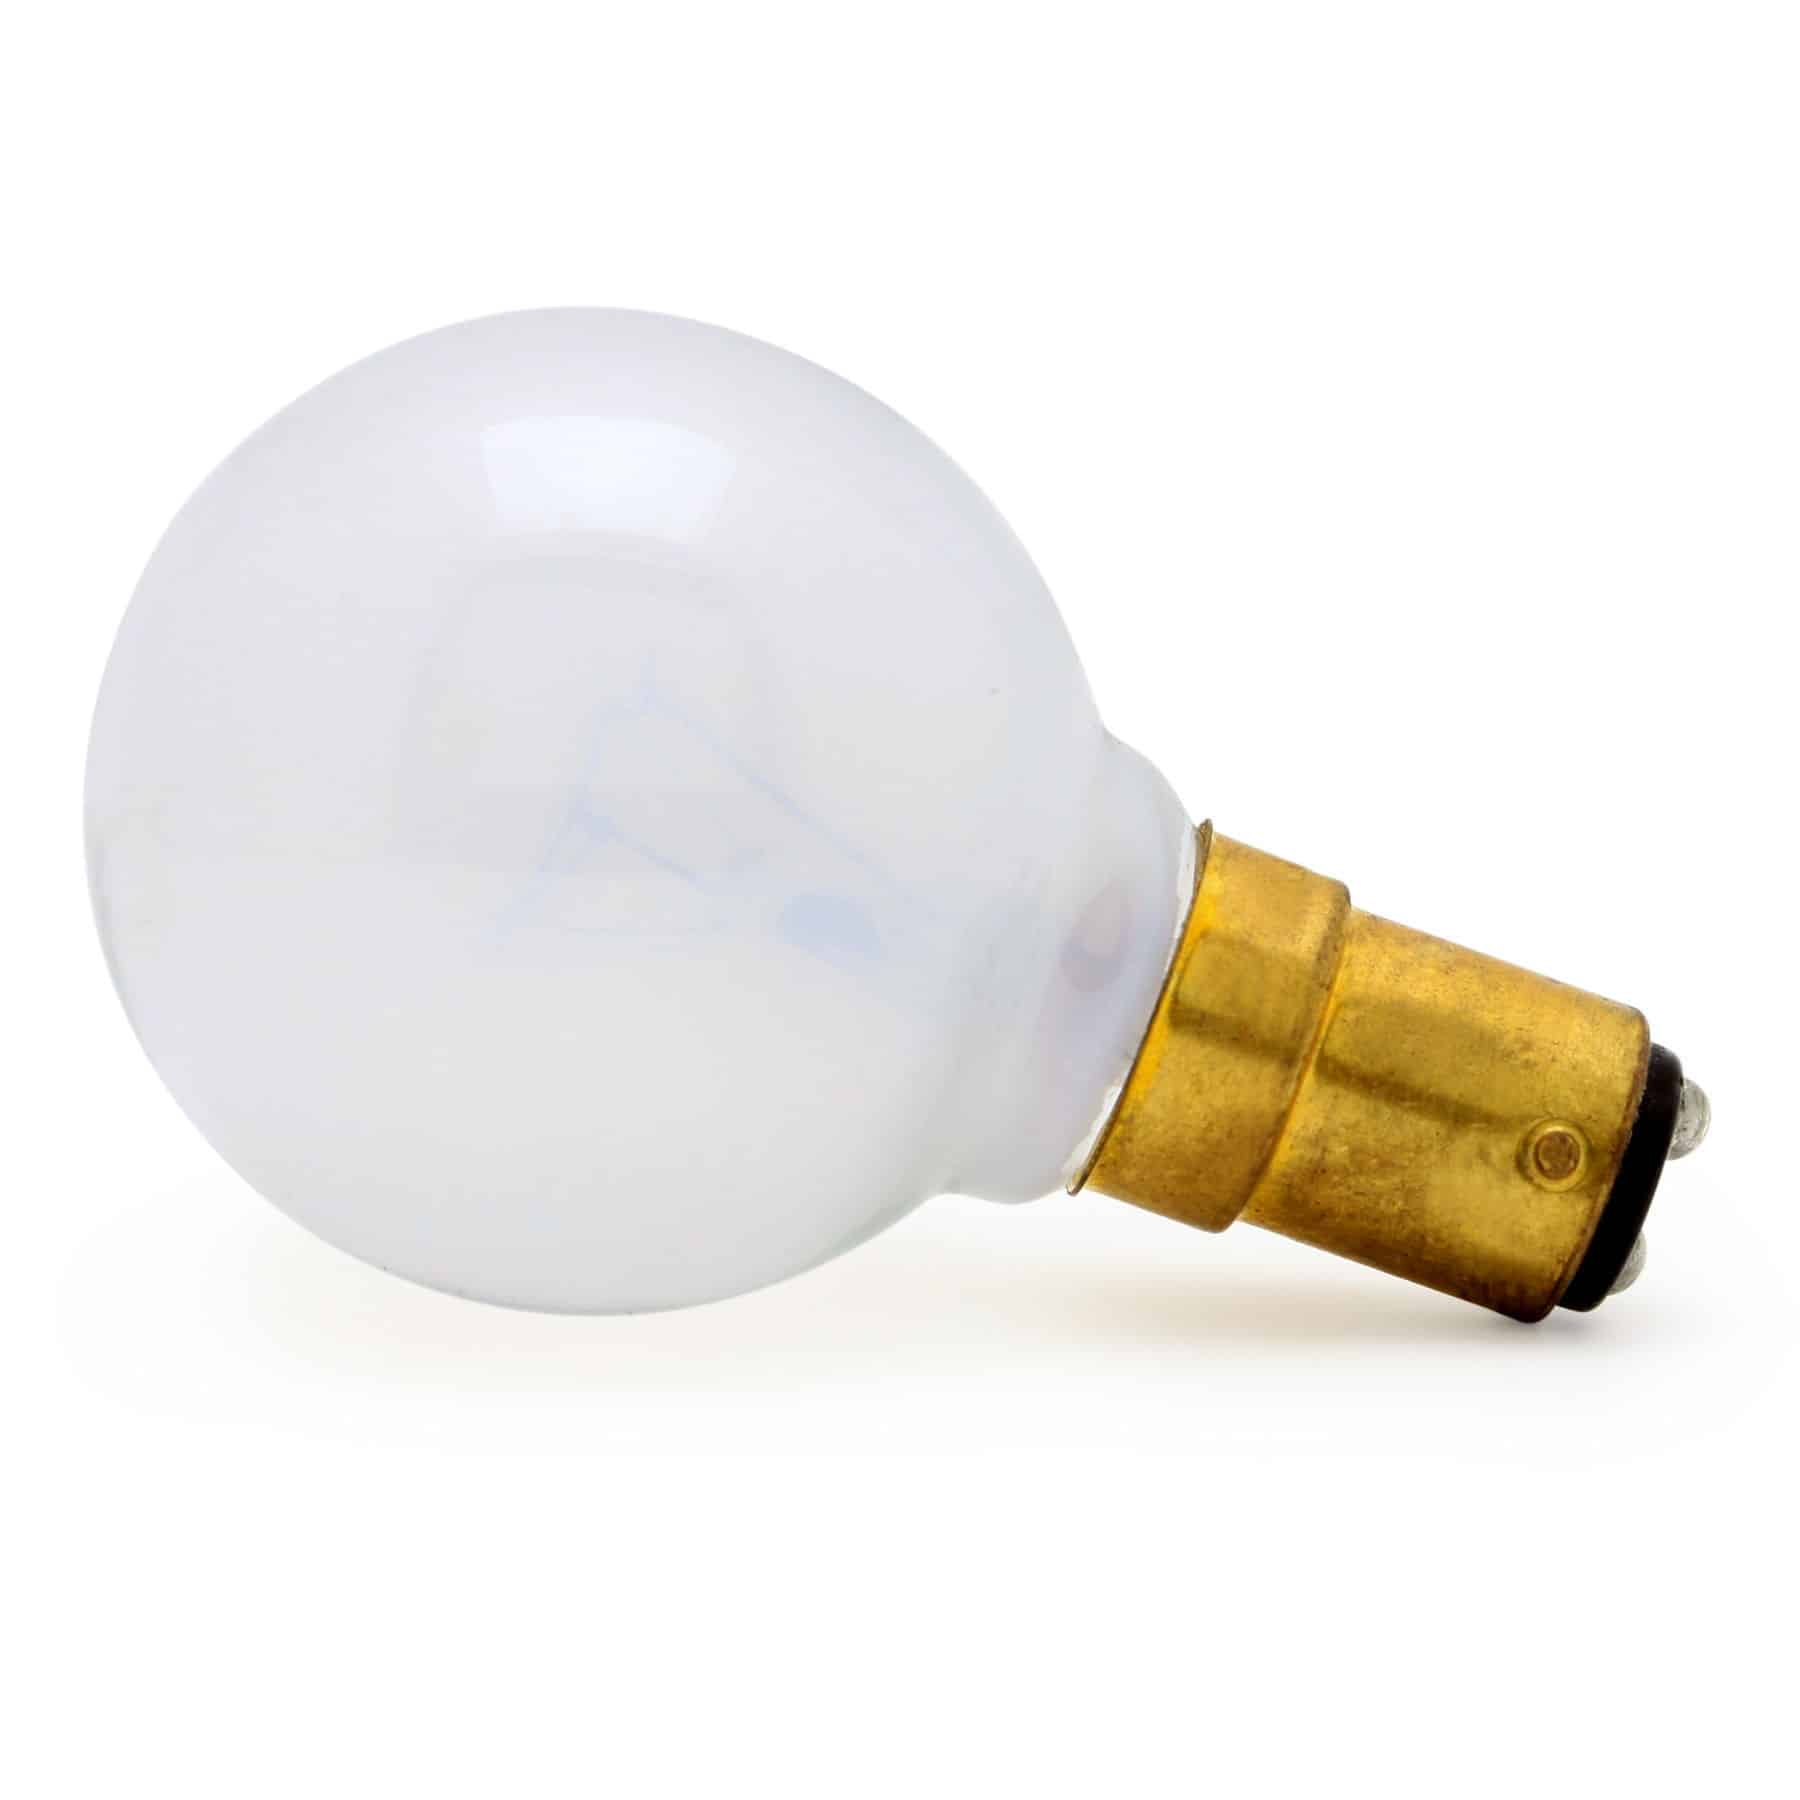 10 Pack 25W Incandescent SBC B15 Small Bayonet Clear 45mm Round Golfball Bulb